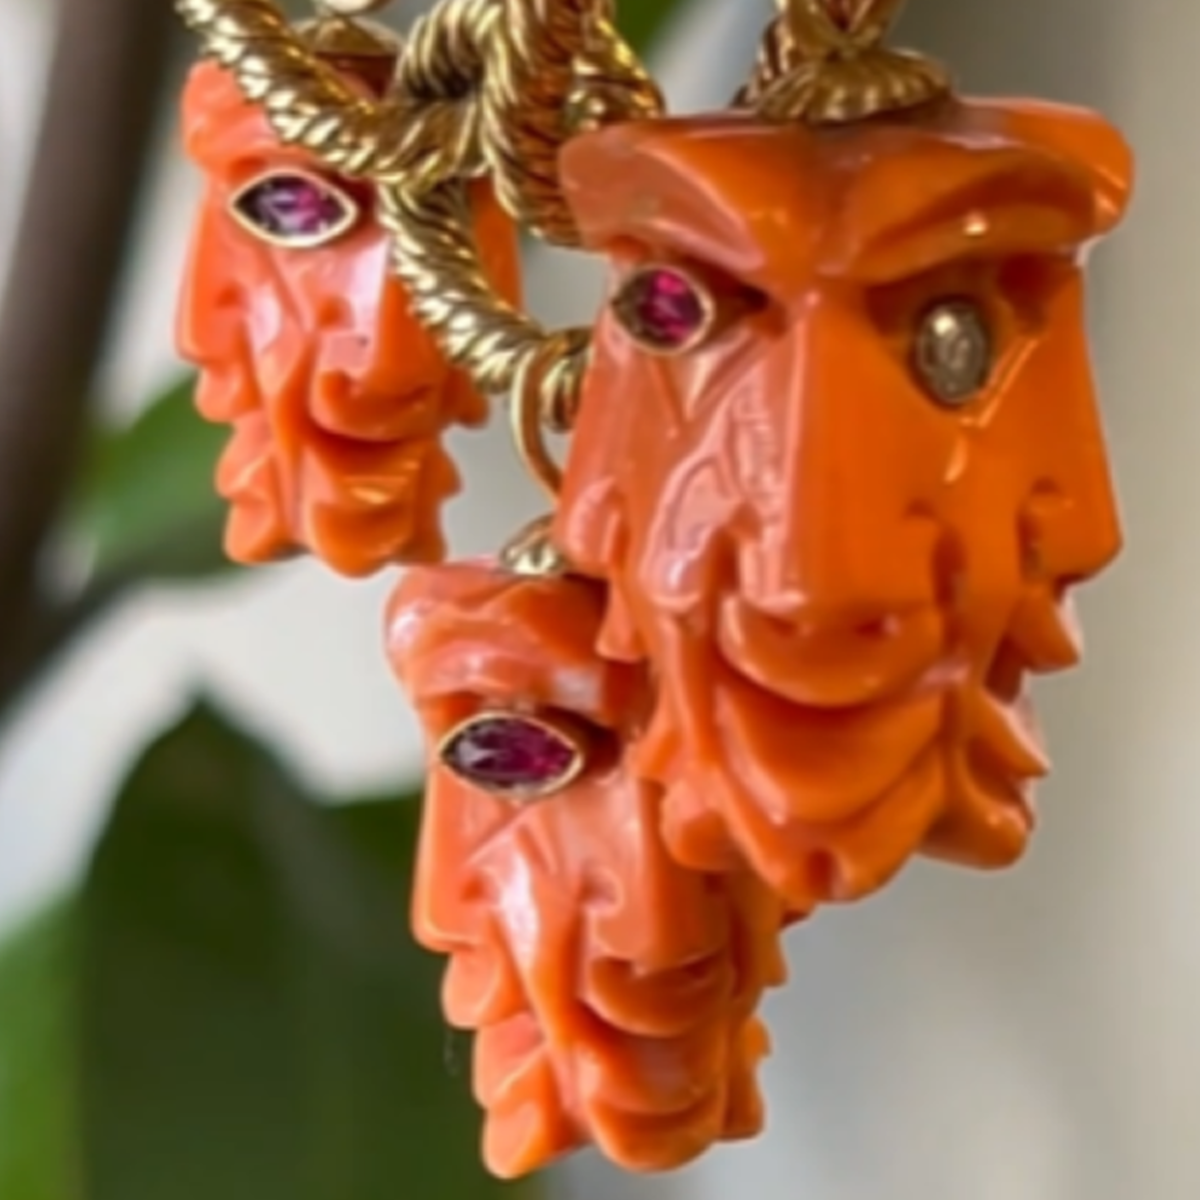 1970s 18KT Yellow Gold Carved Coral, Diamond & Ruby Charm Bracelet close-up details